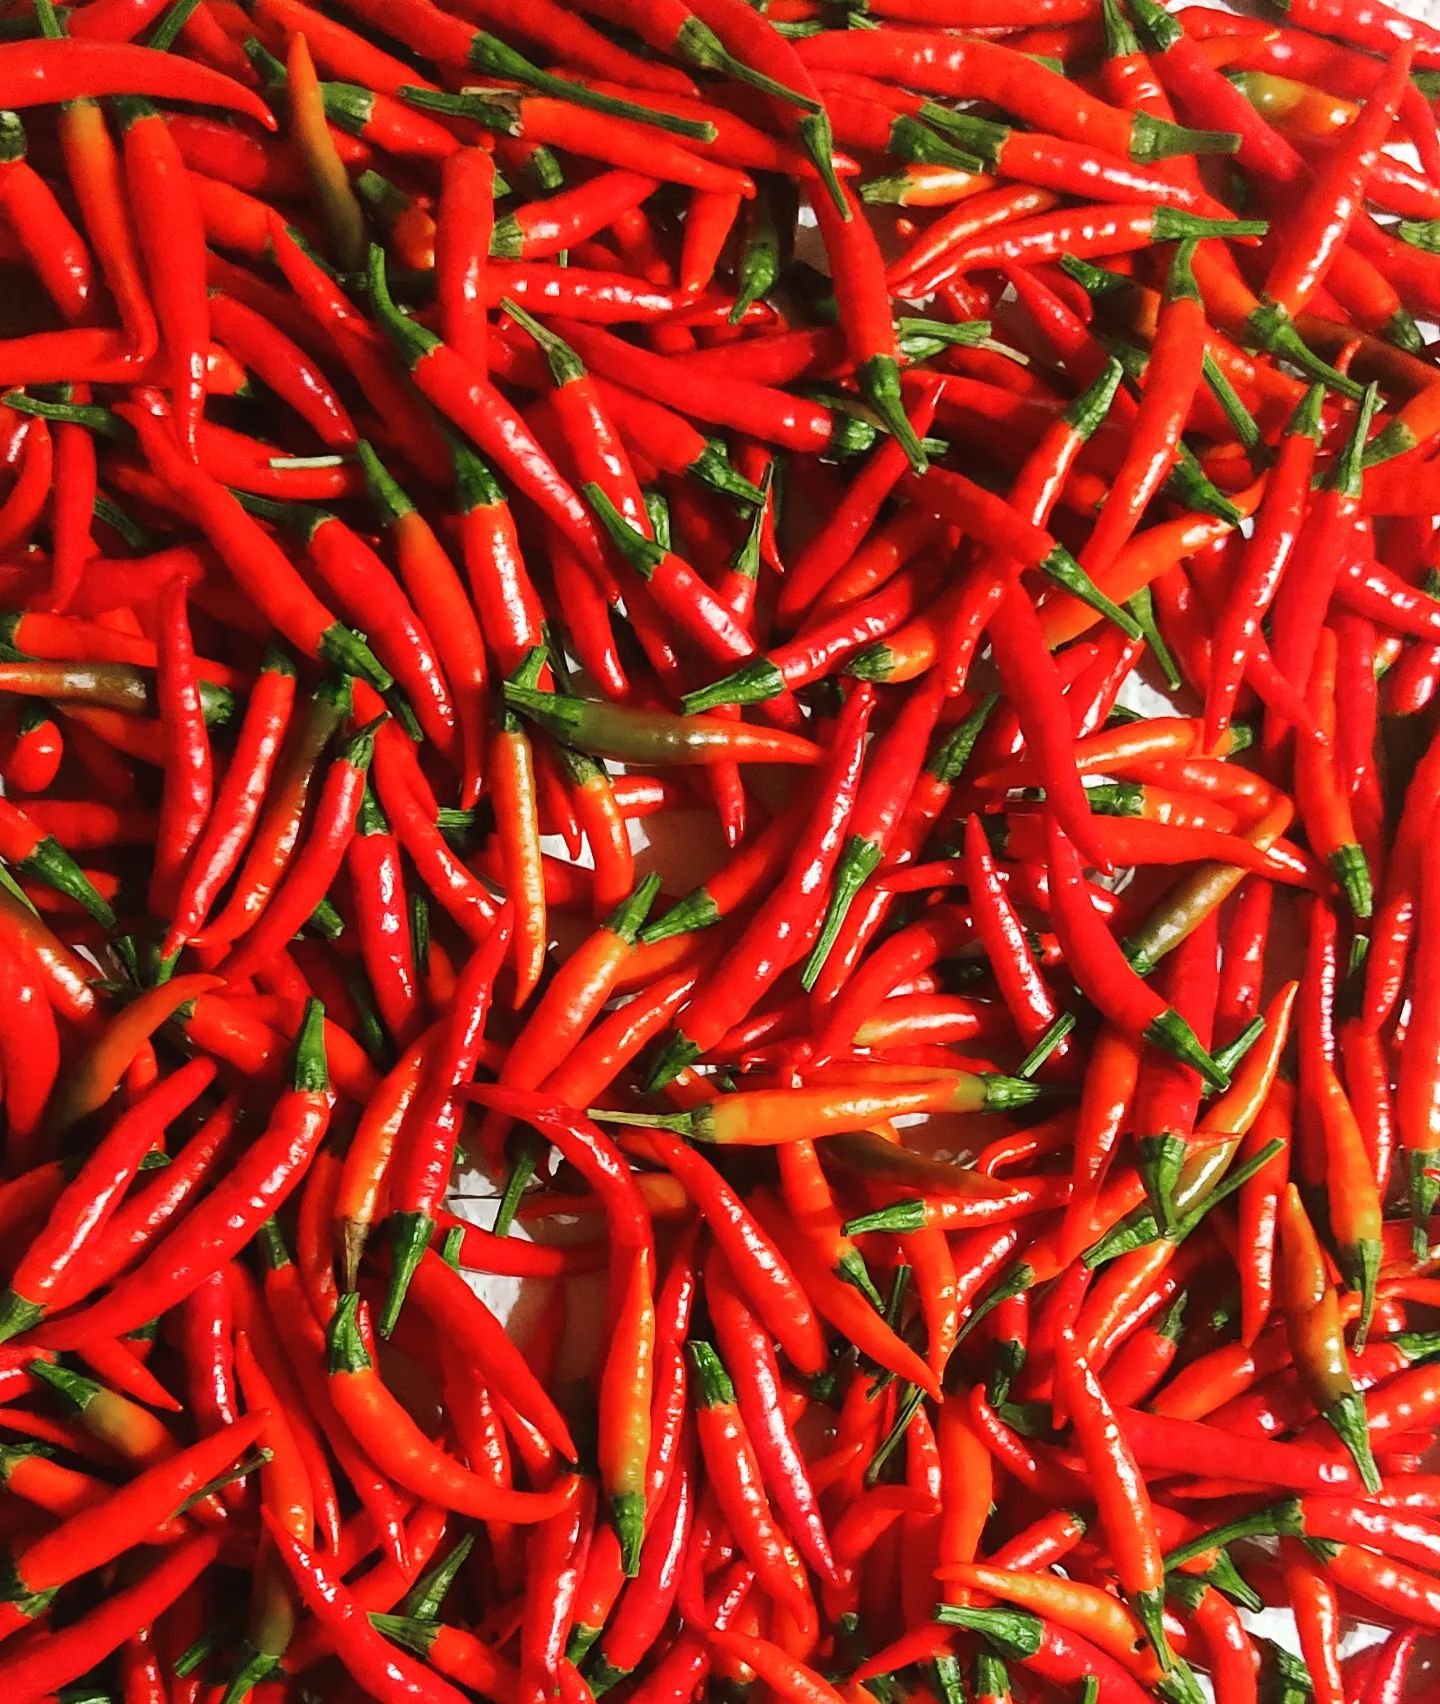 Bumper crop of red hot chilli peppers thanks to the warm, October sunshine 🌶️

#chilli #permaculturegarden #octoberharvest #kimchi